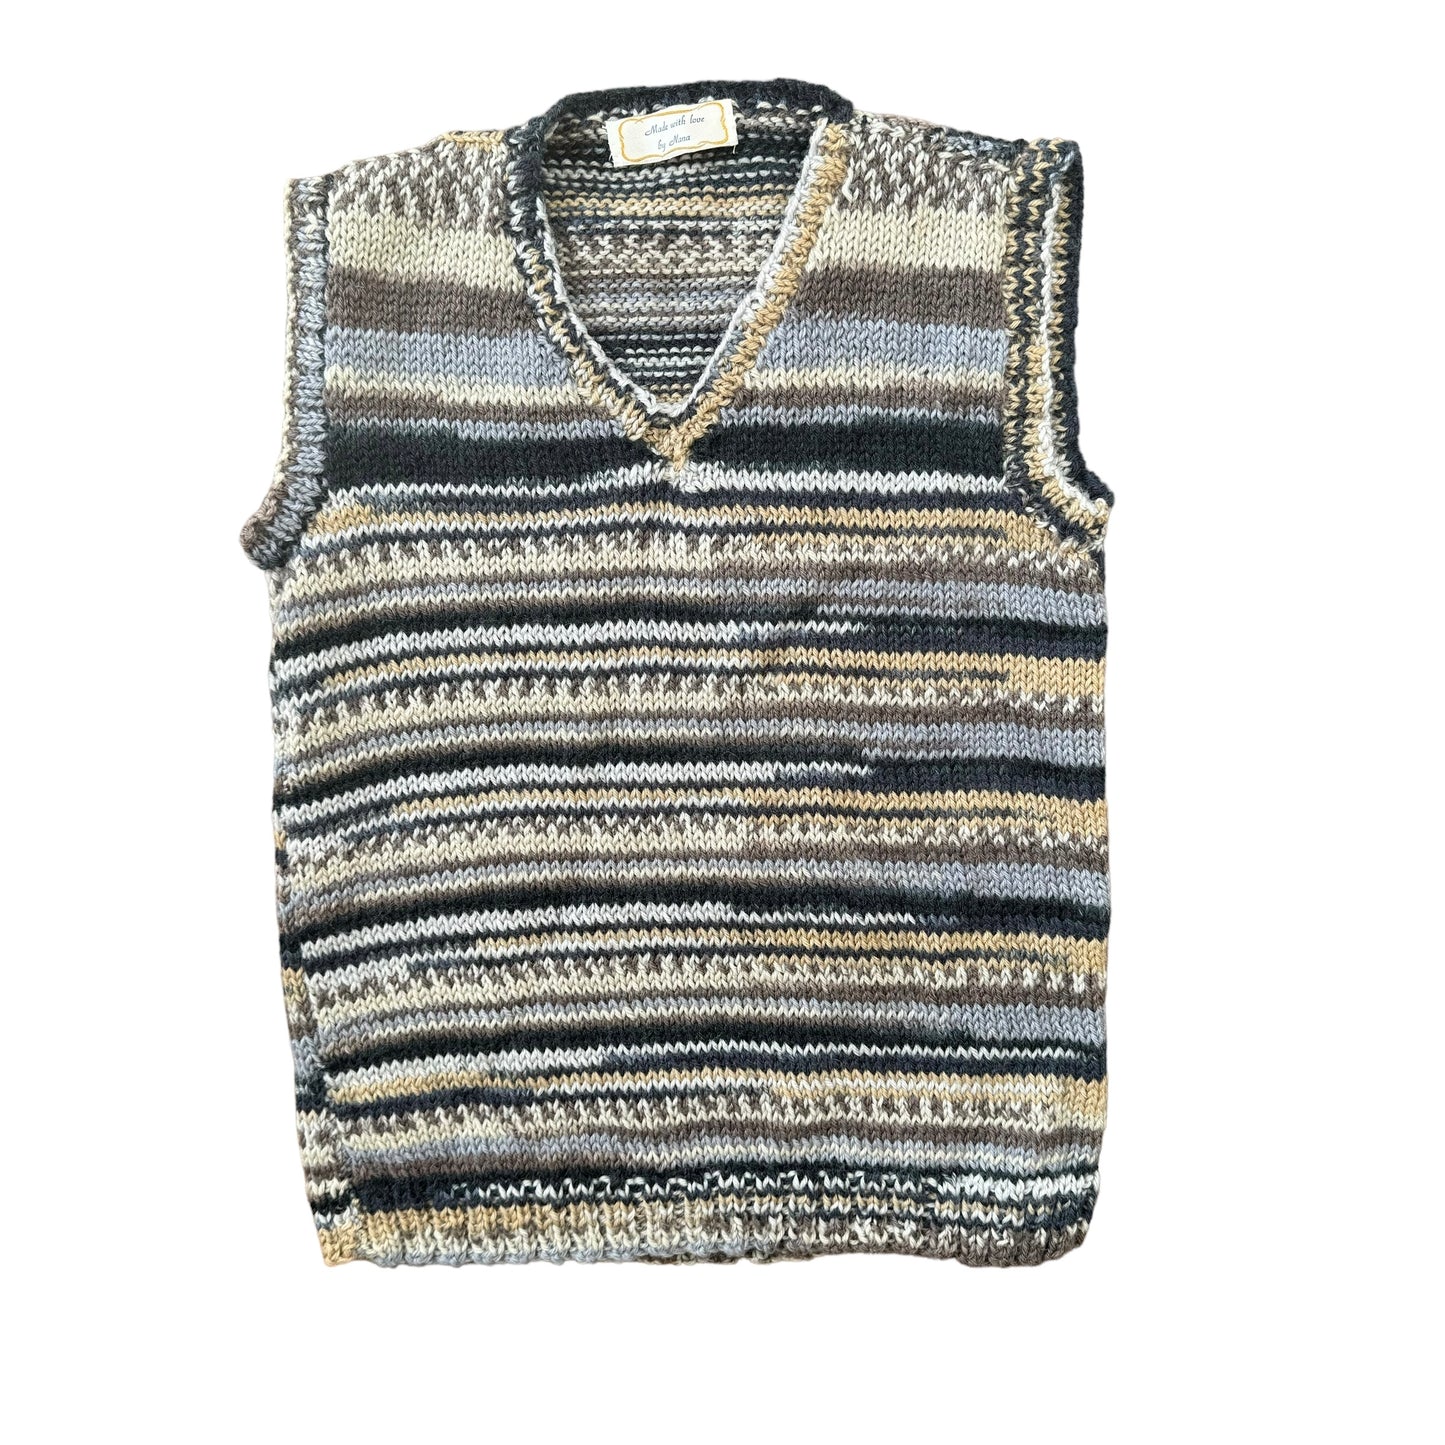 Hand-knitted Vest | Size: 3 - 5 years | EUC